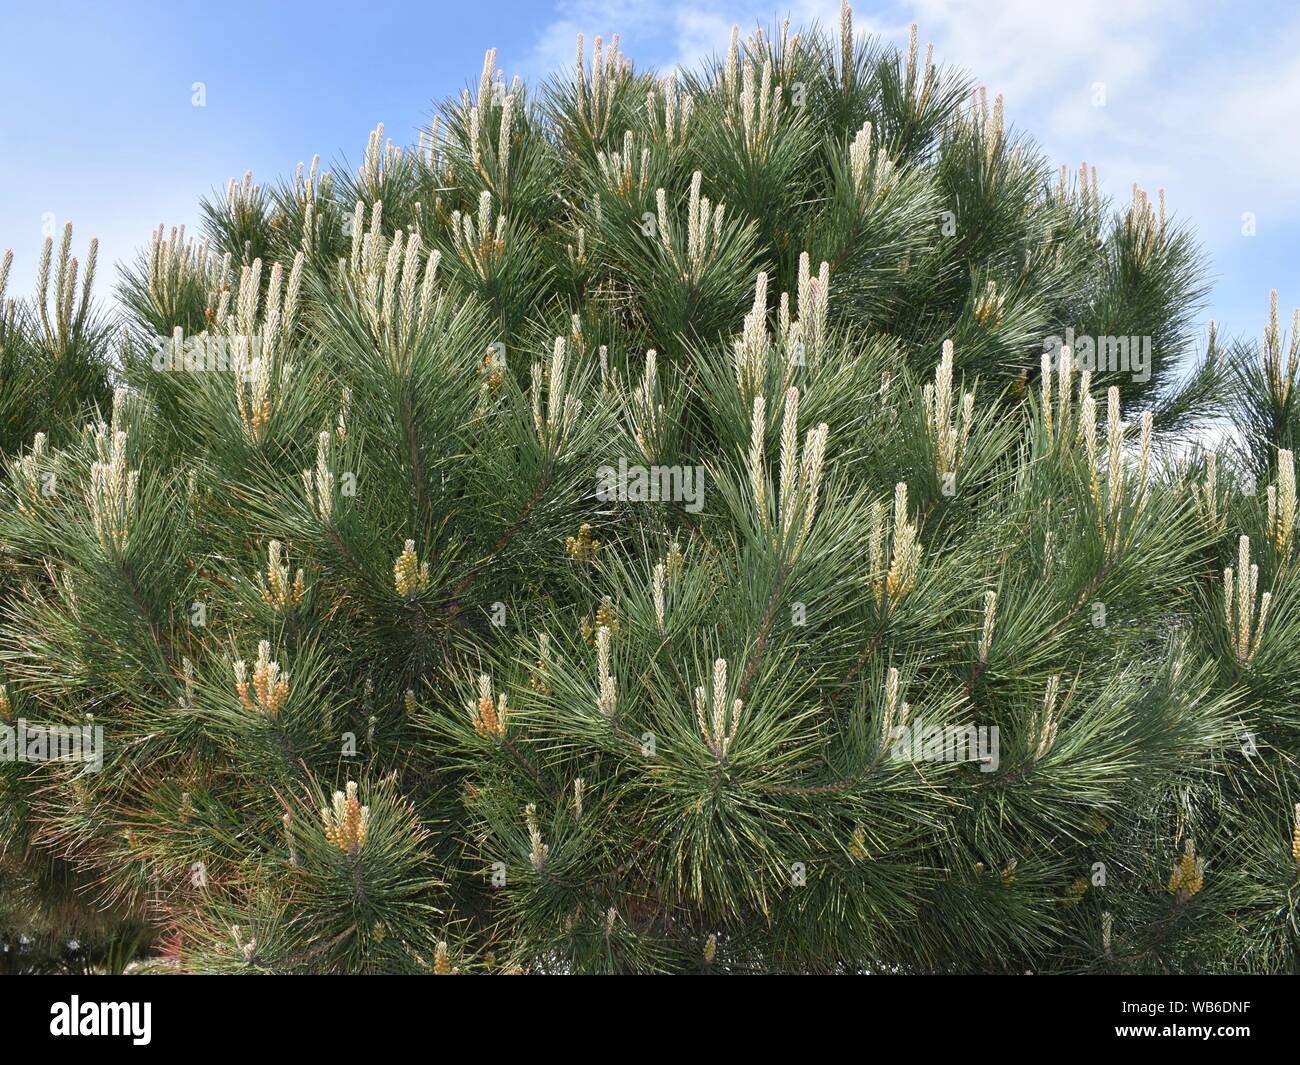 A close up of a thick pine tree in summer showing new growth Stock Photo